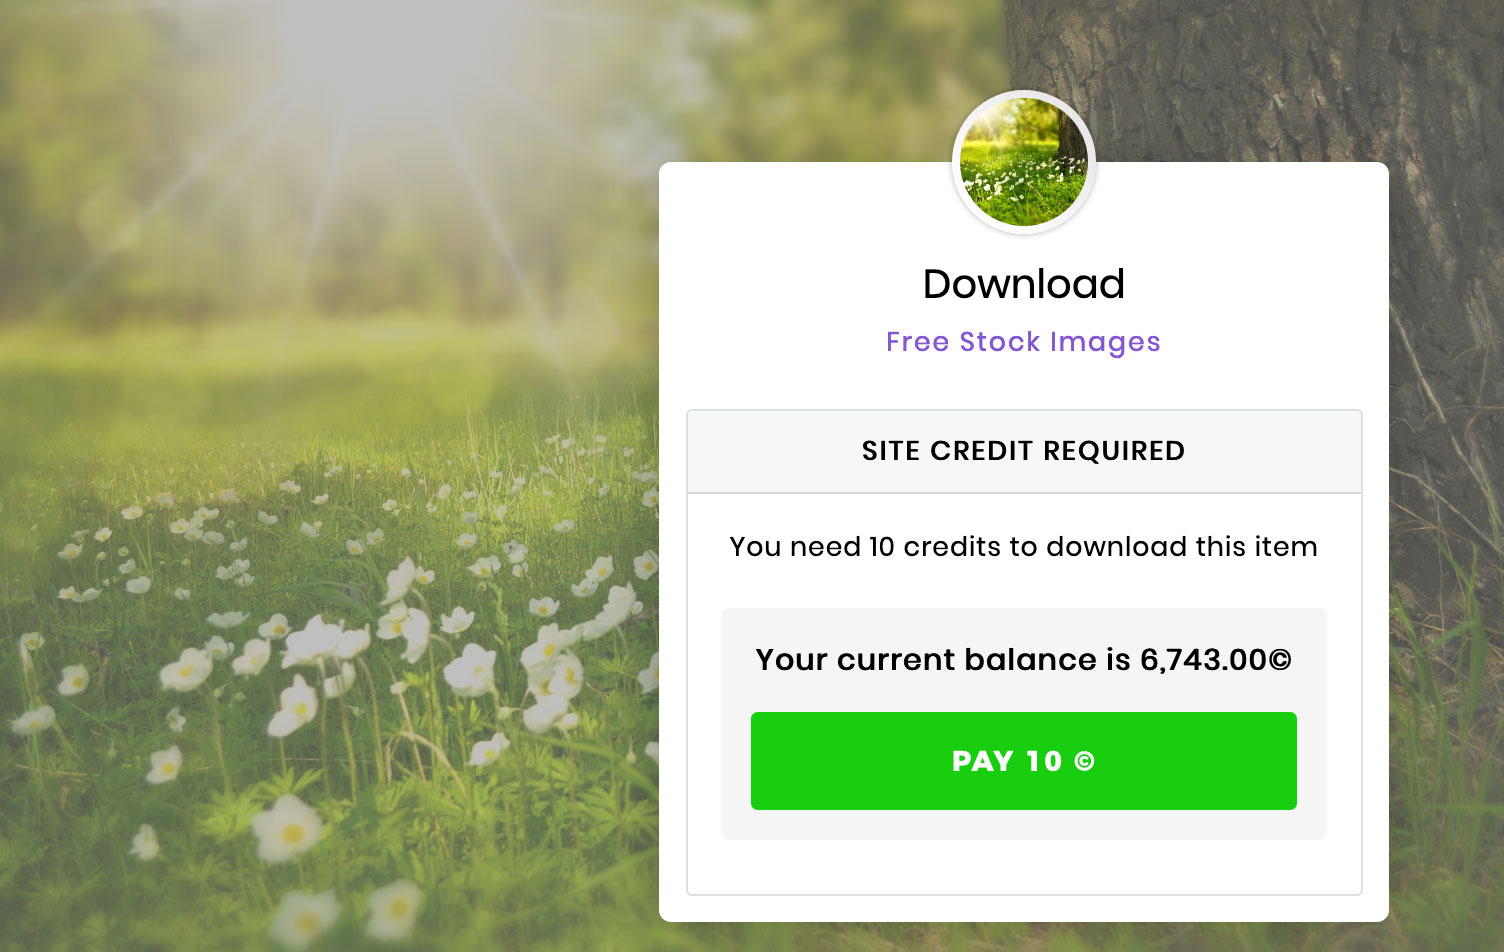 Site credit is required to download